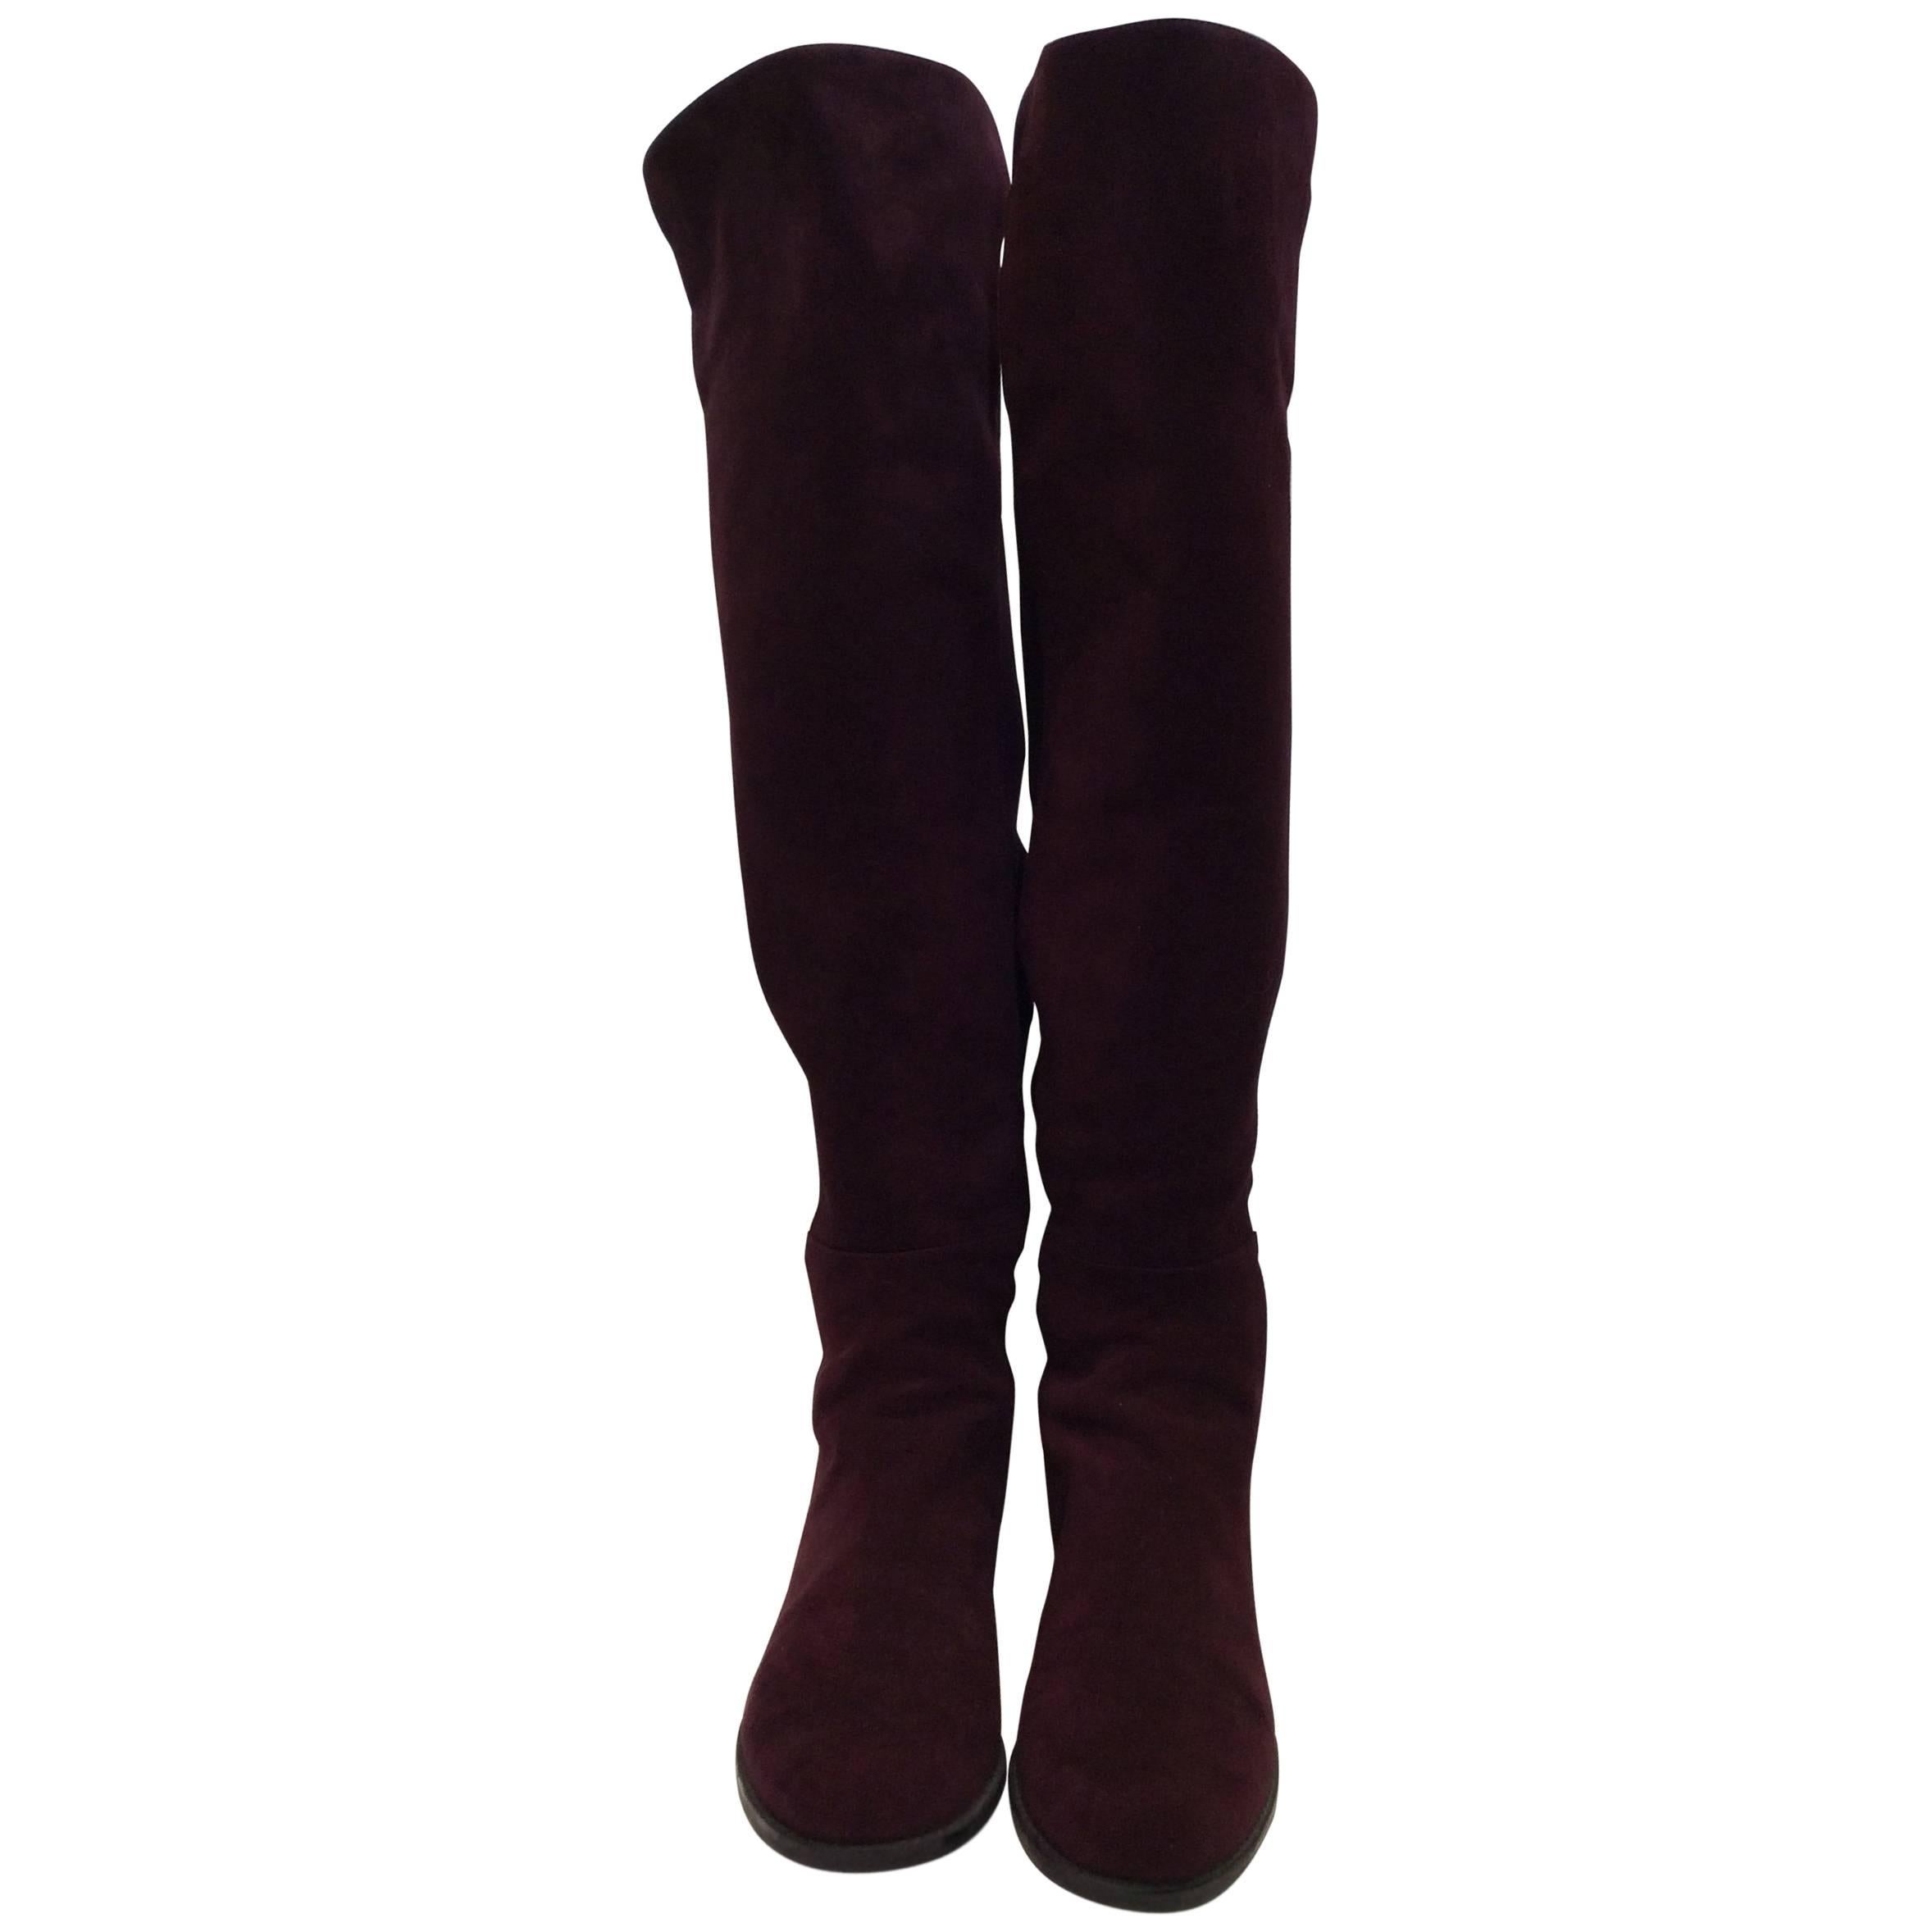 Stuart Weitzman Oxblood Suede Over The Knee Boots For Sale